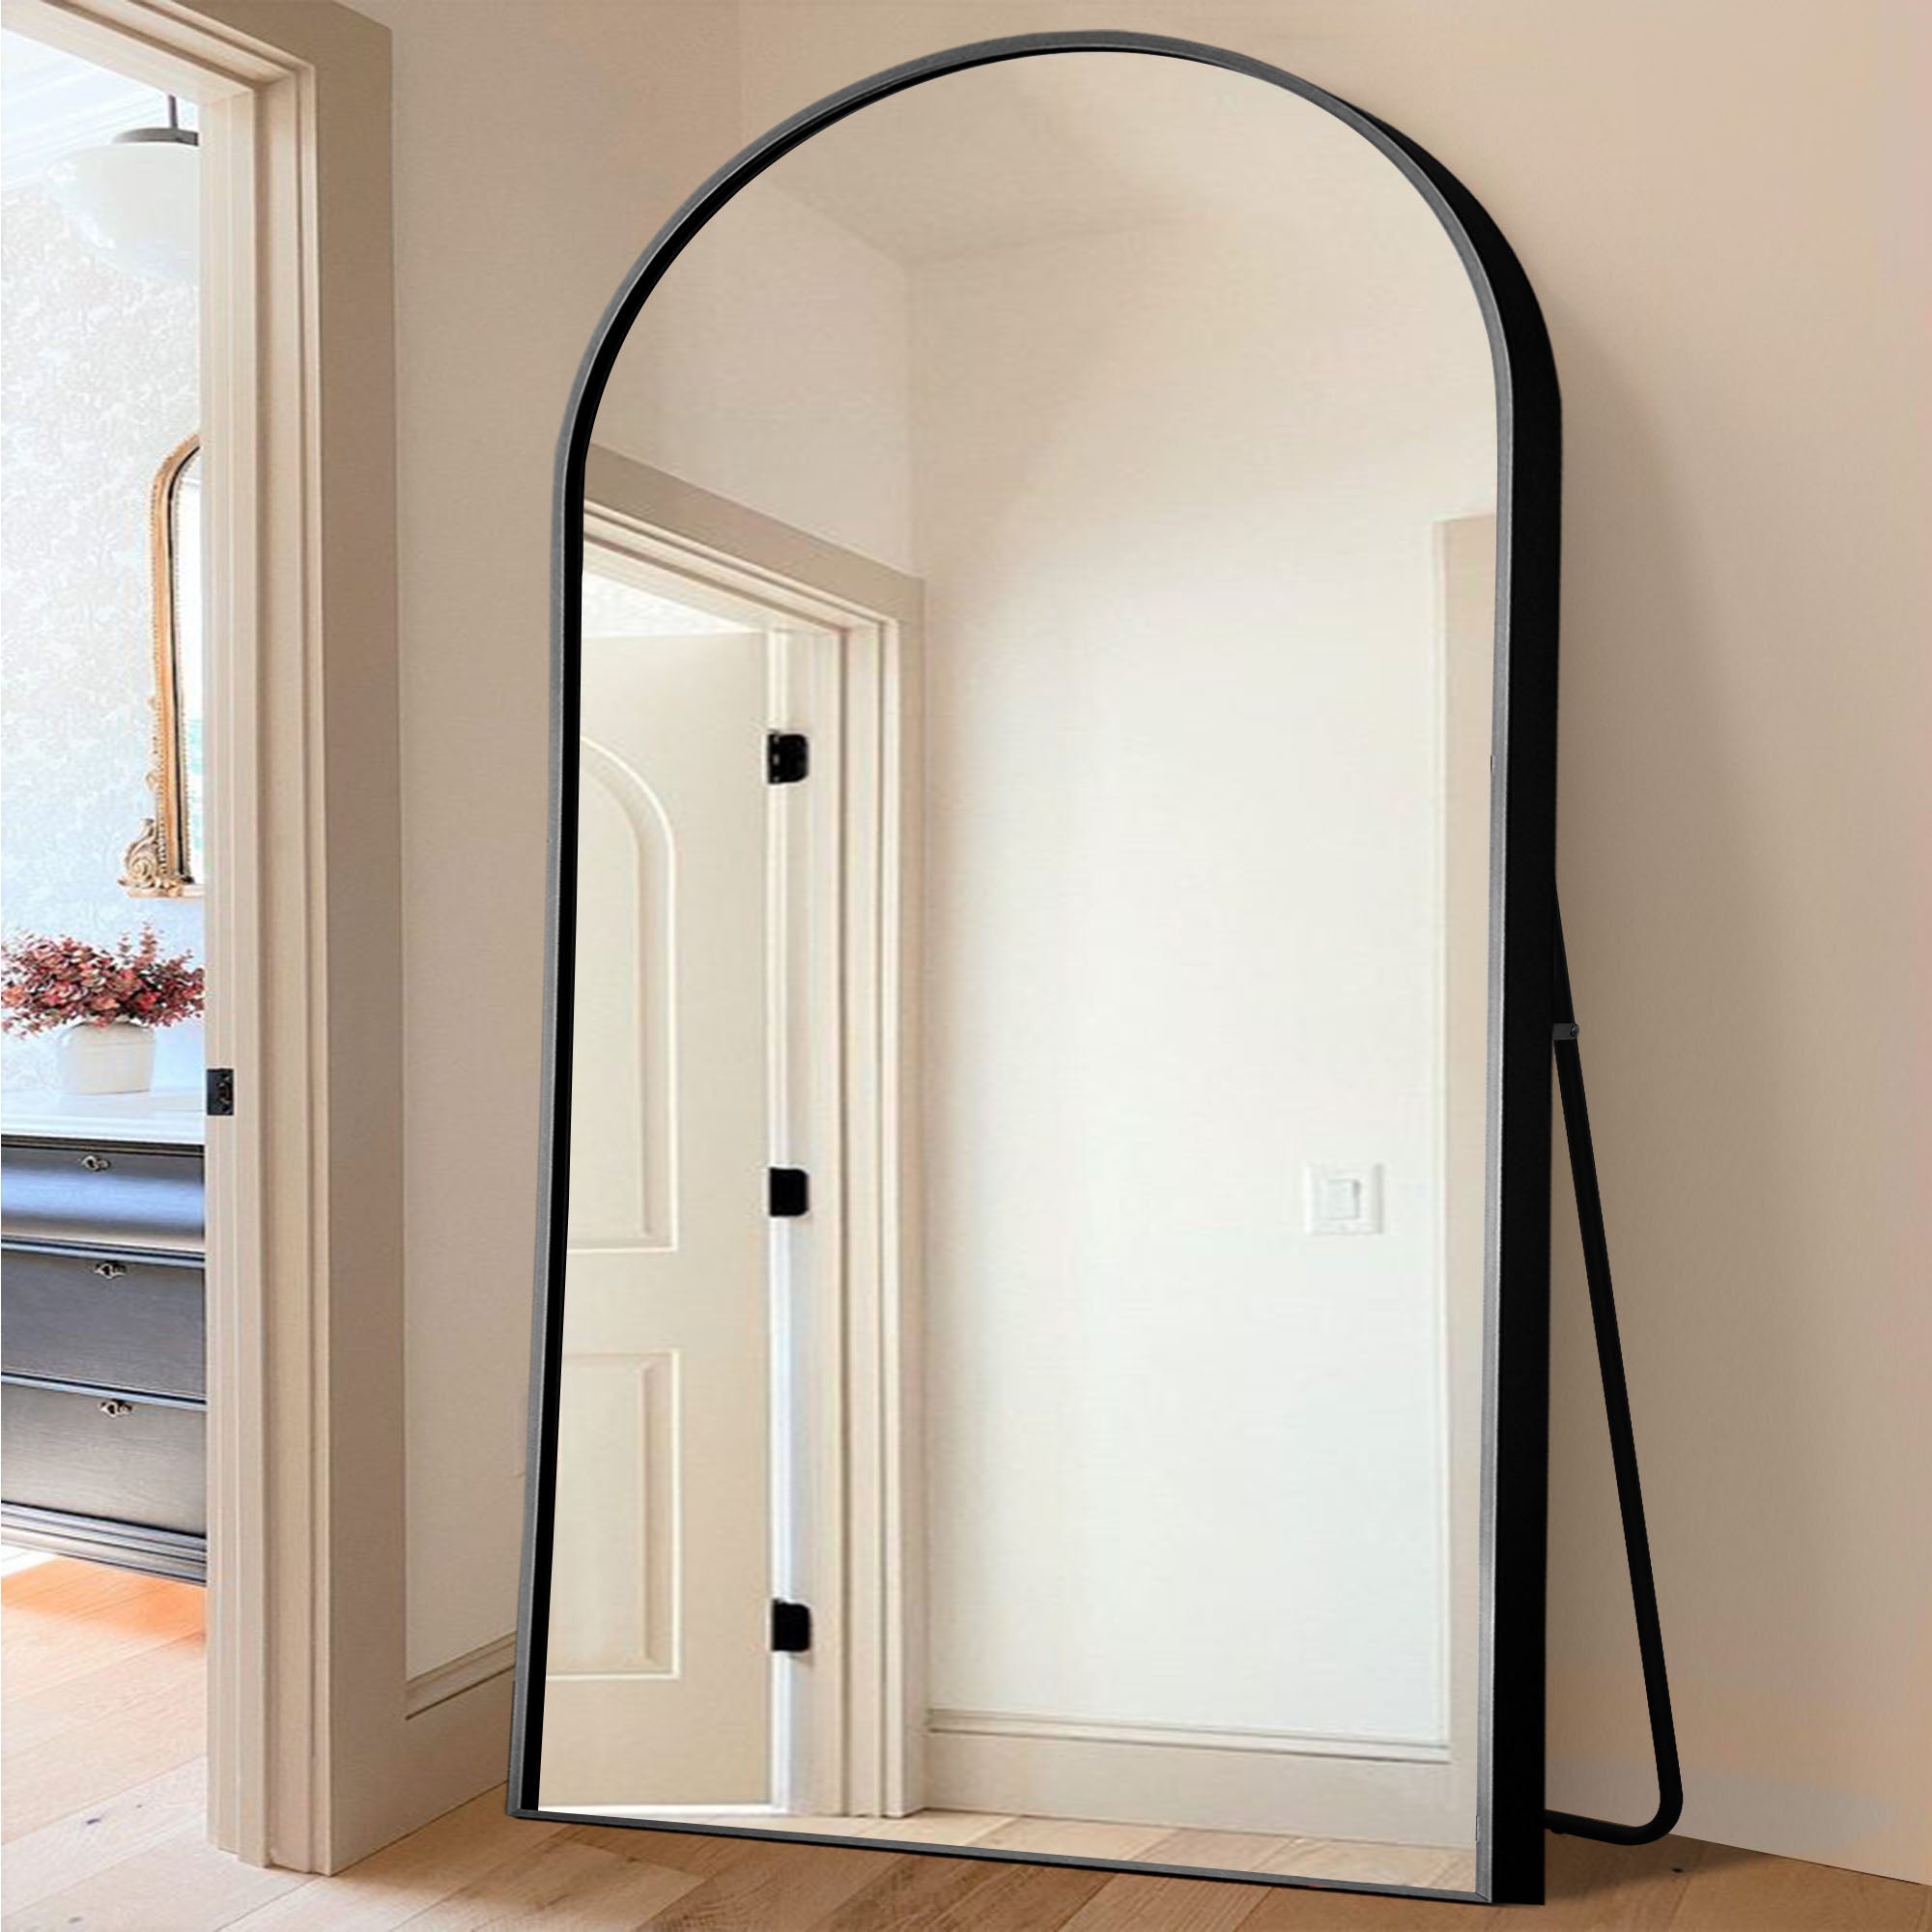 black oversize arched full length floor mirror